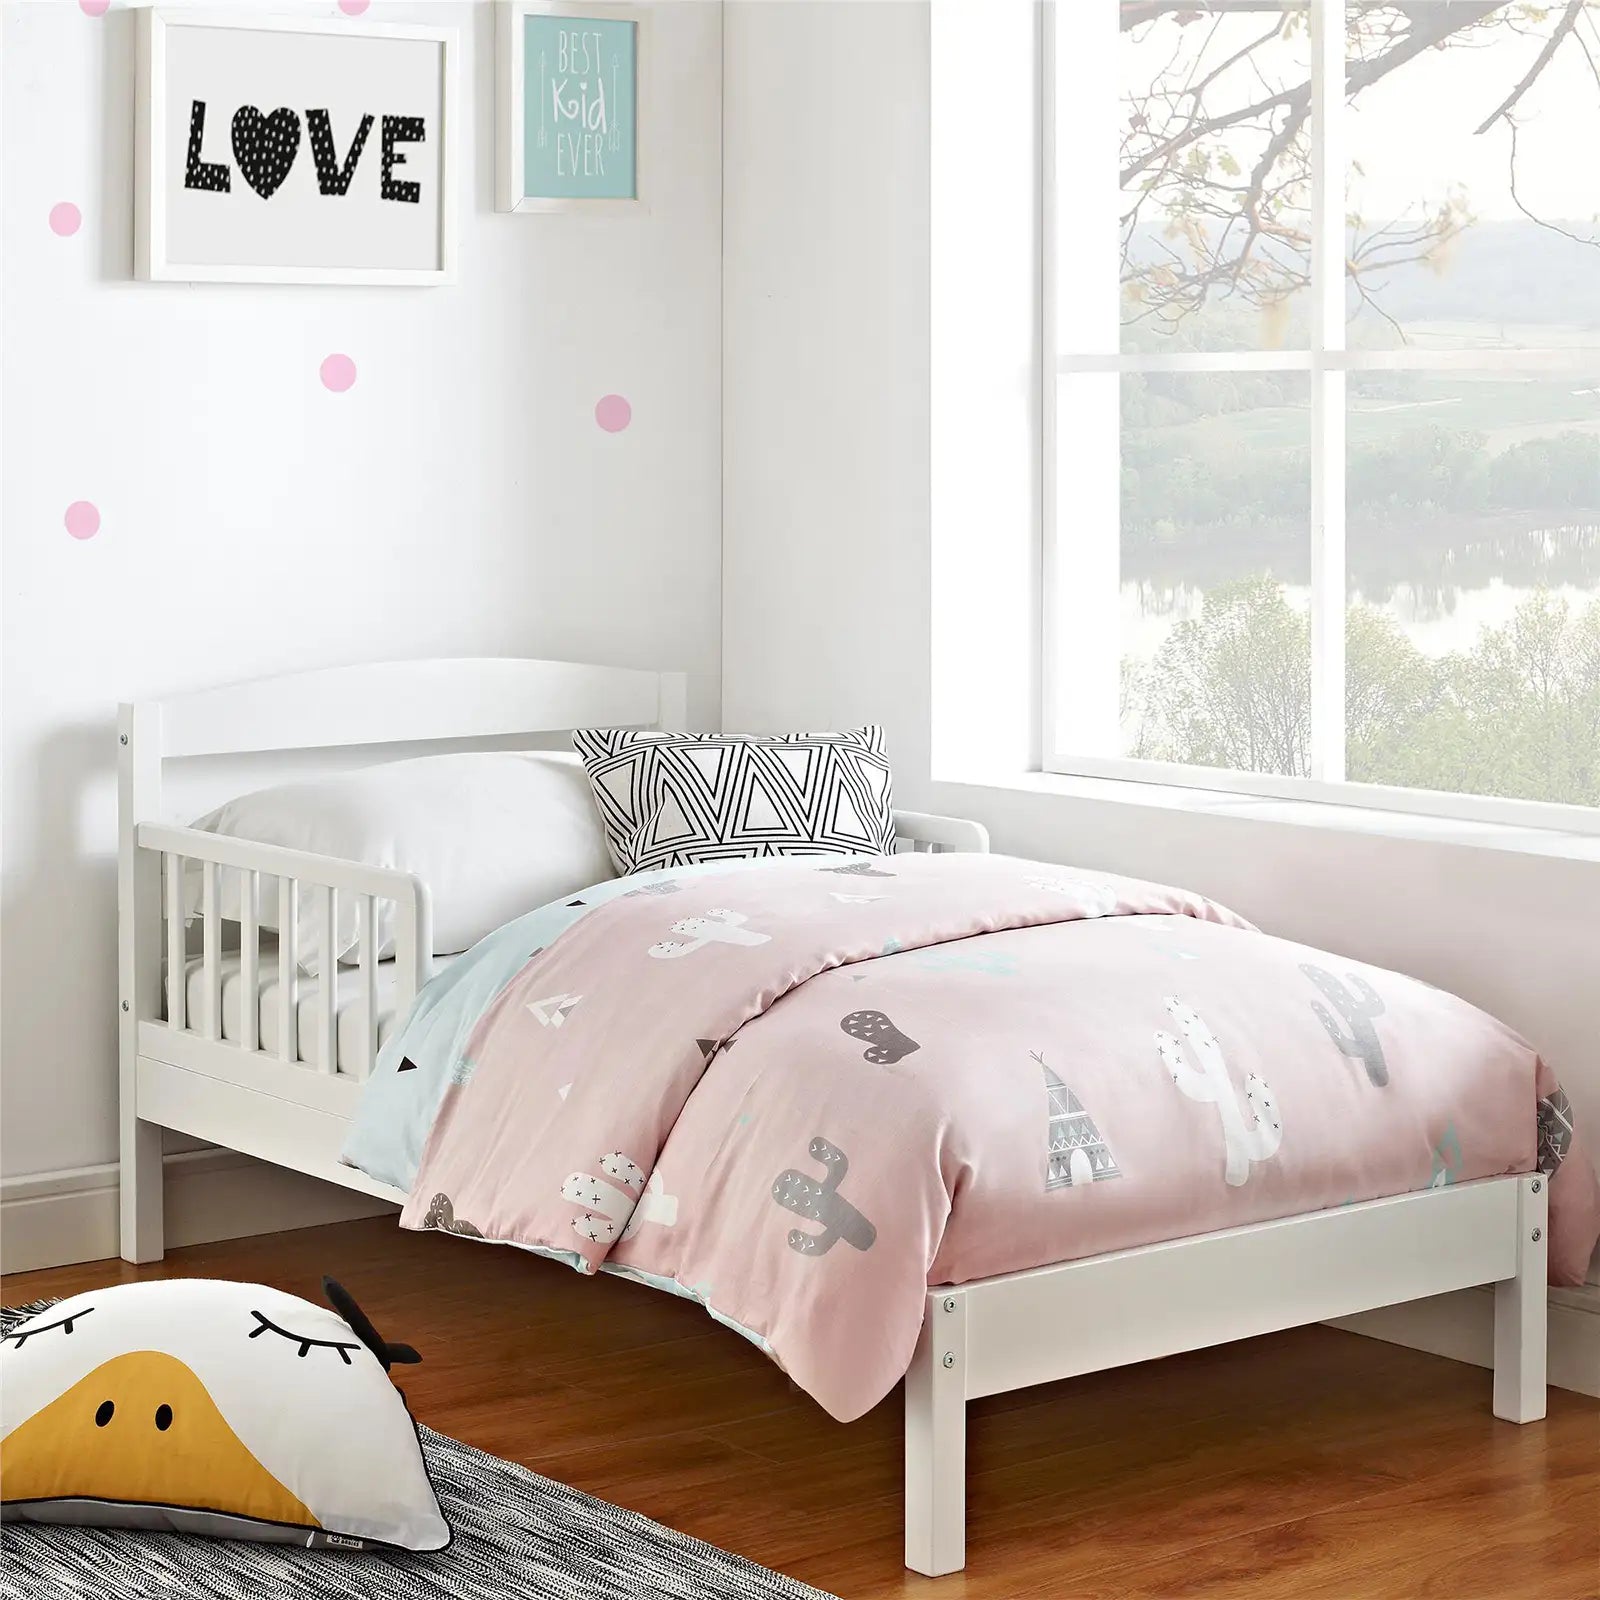 Transitional Wood Toddler Bed